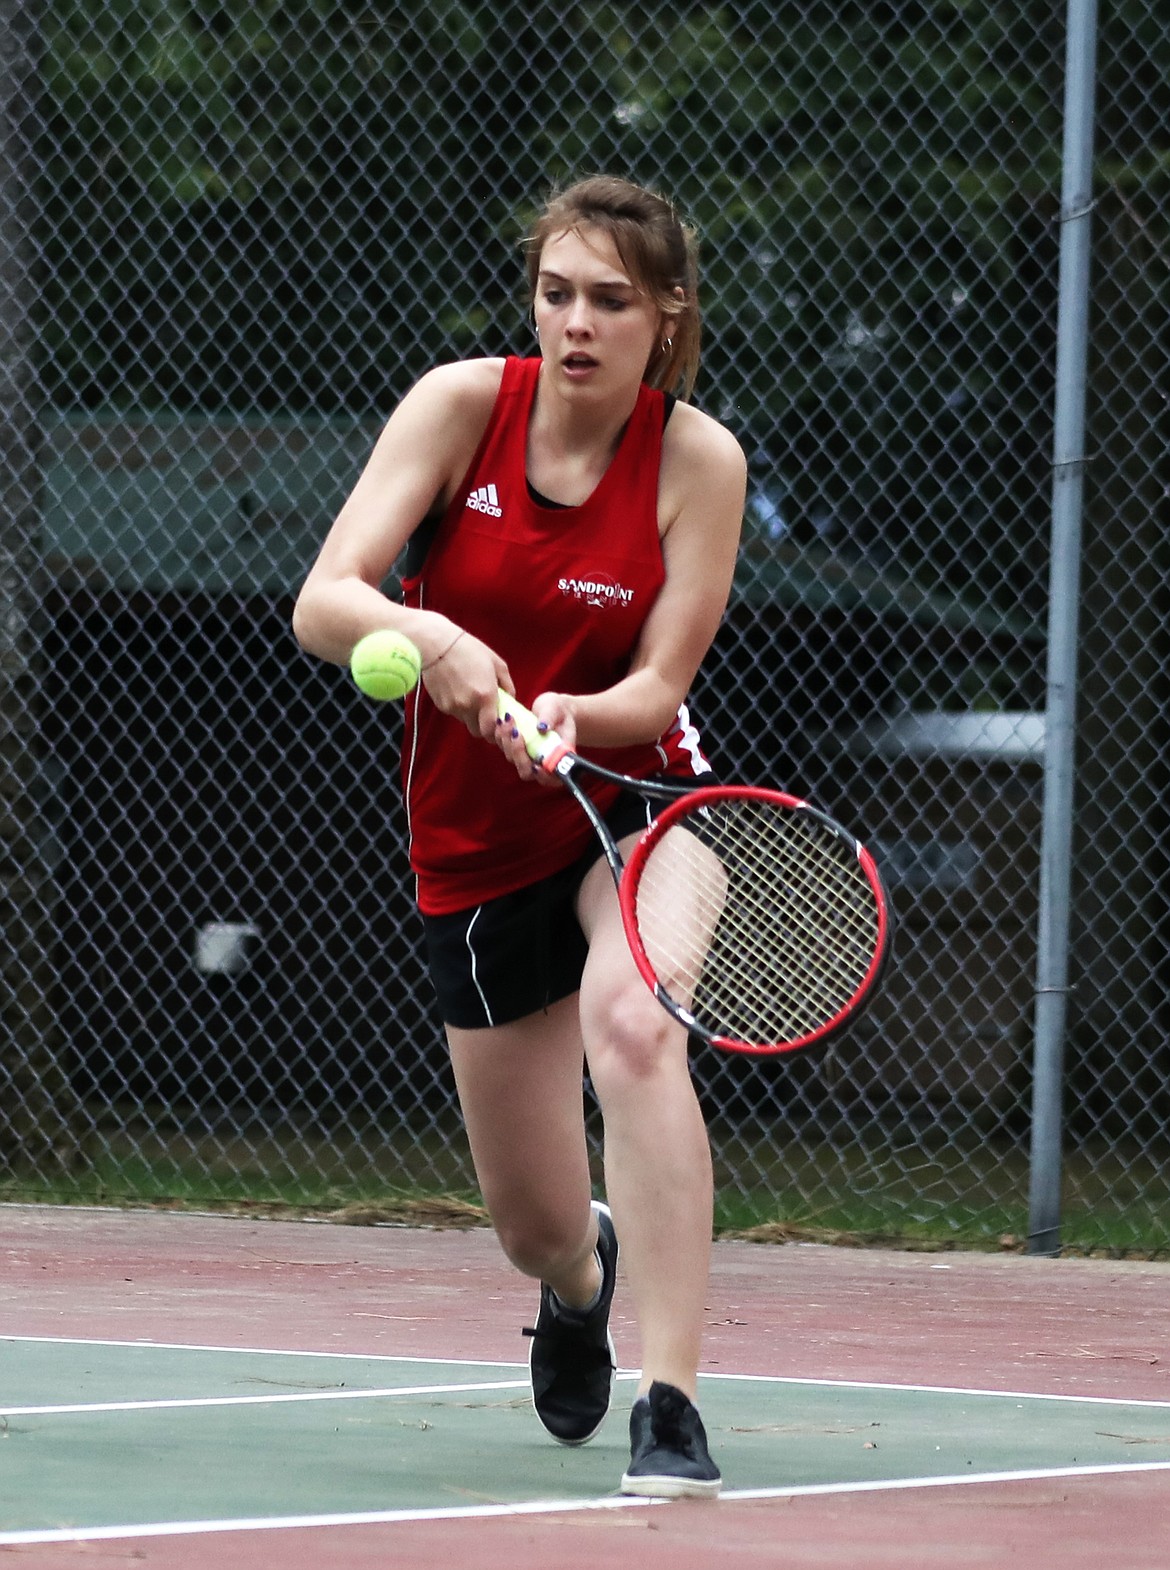 (Photo by KYLE CAJERO) Sandpoint senior Colleene McBride prepares to hit a backhand during her singles match against Post Falls&#146; Charlie Bastedo on May 1.